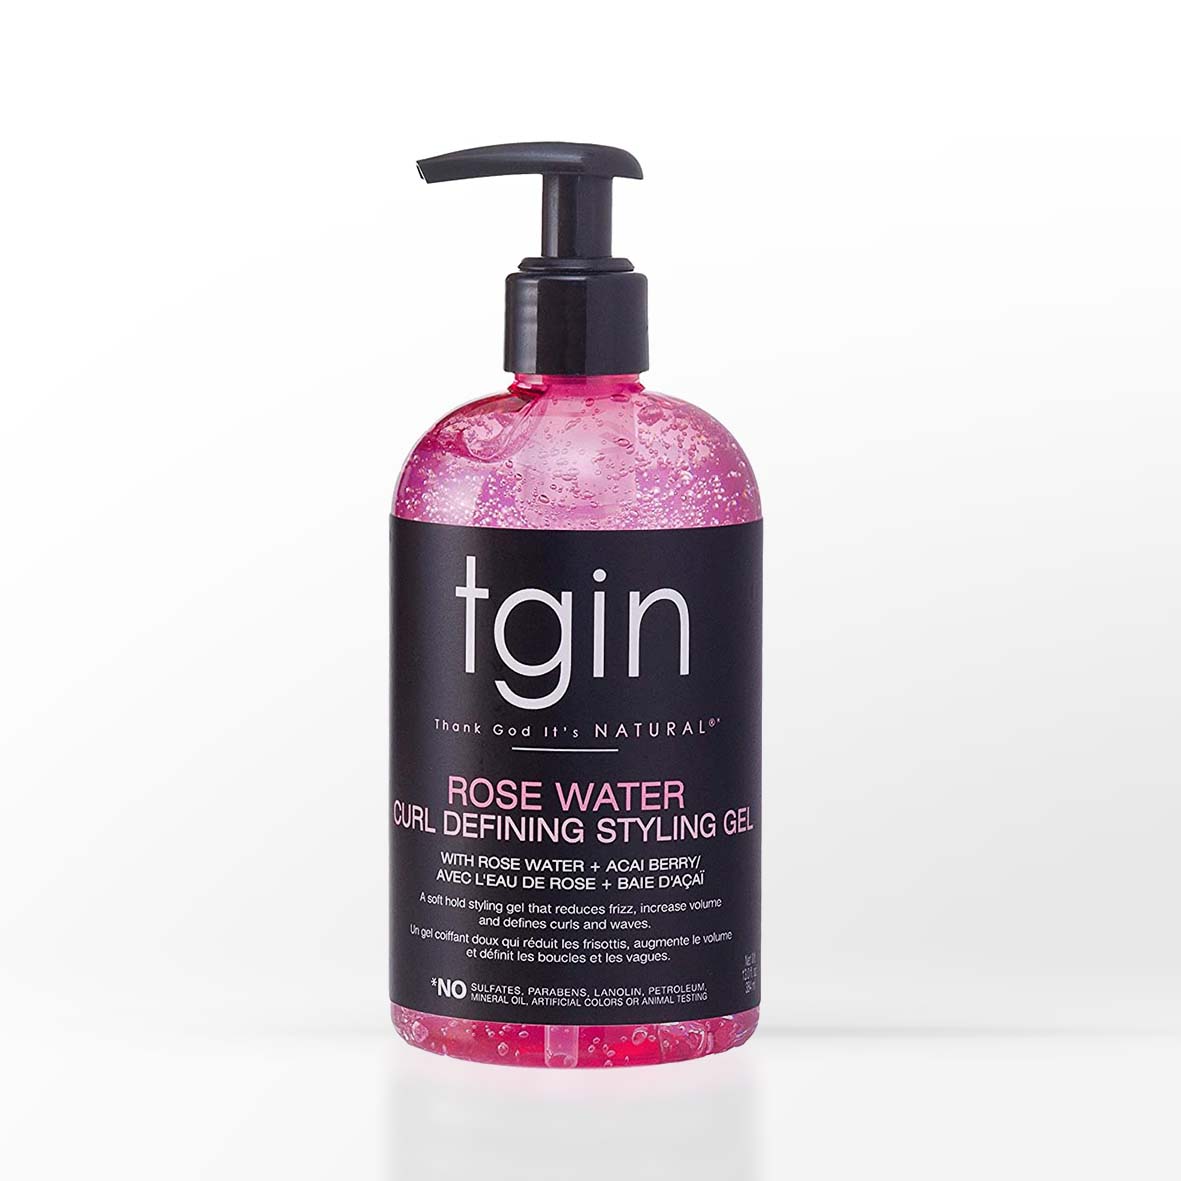 TGIN THANK GOD IT'S NATURAL ROSE WATER CURL DEFINING STYLING GEL W/ROSE WATER + ACAI BERRY